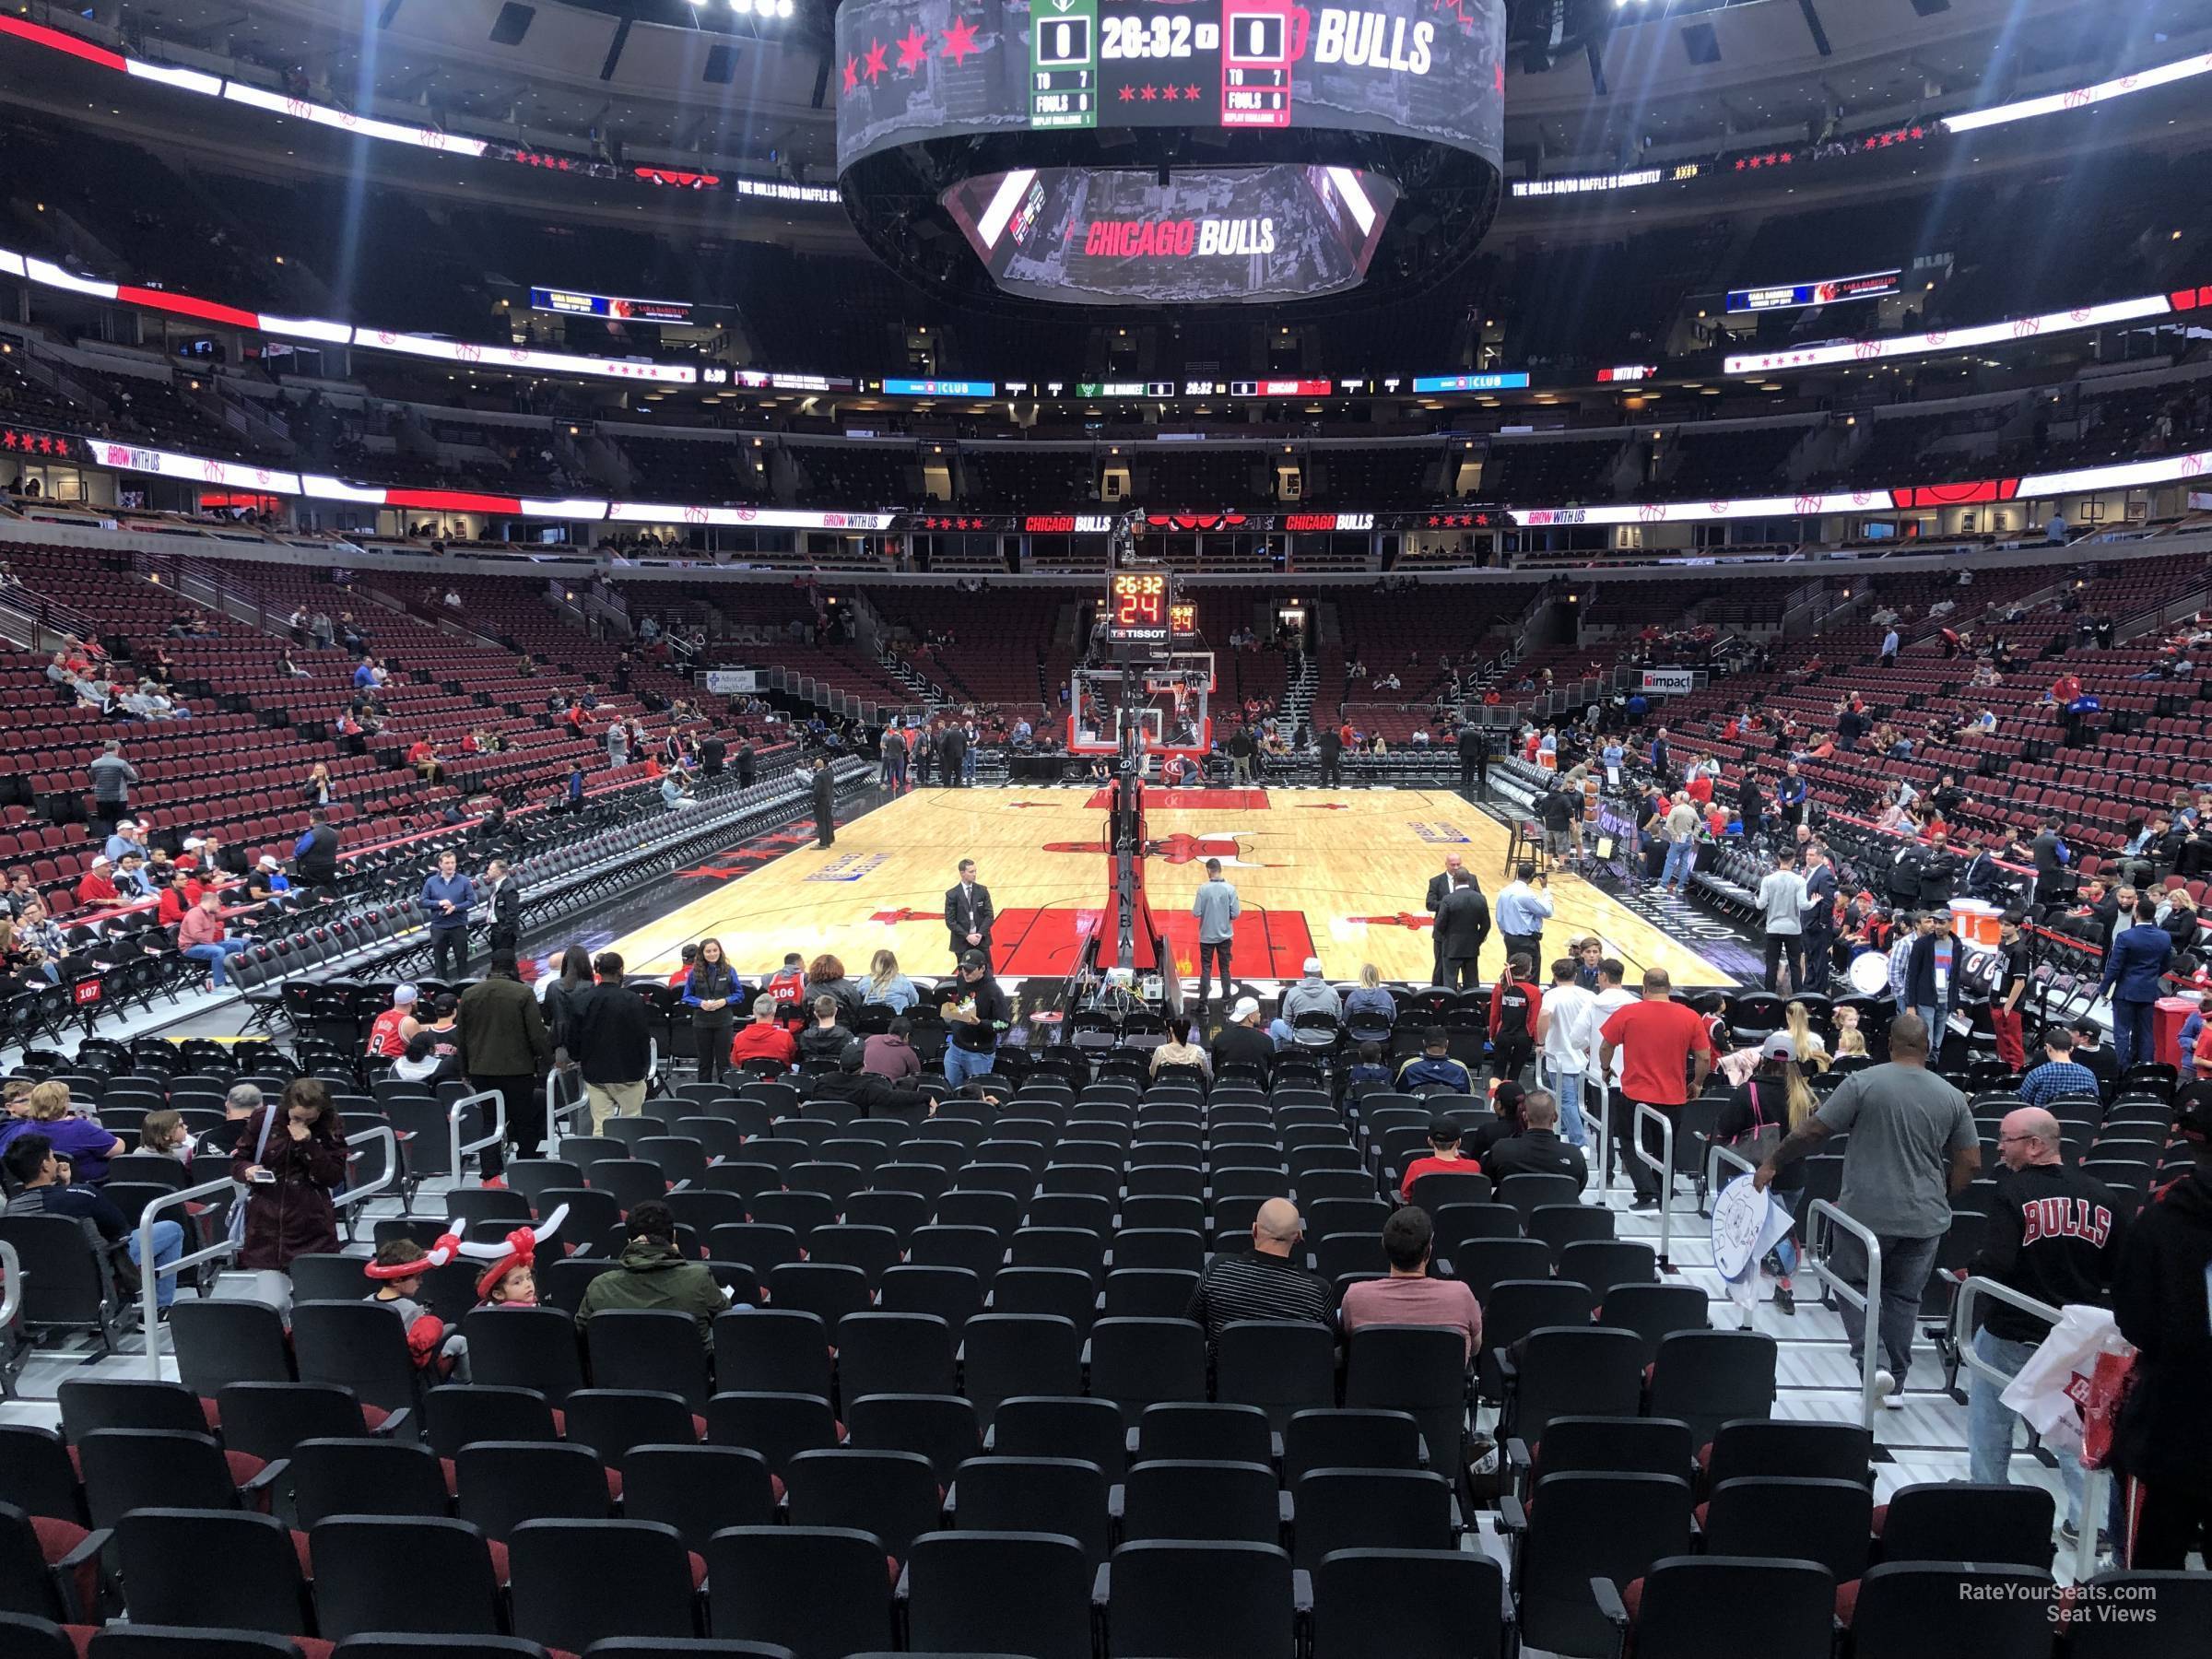 Section 106 at United Center - Chicago Bulls - RateYourSeats.com